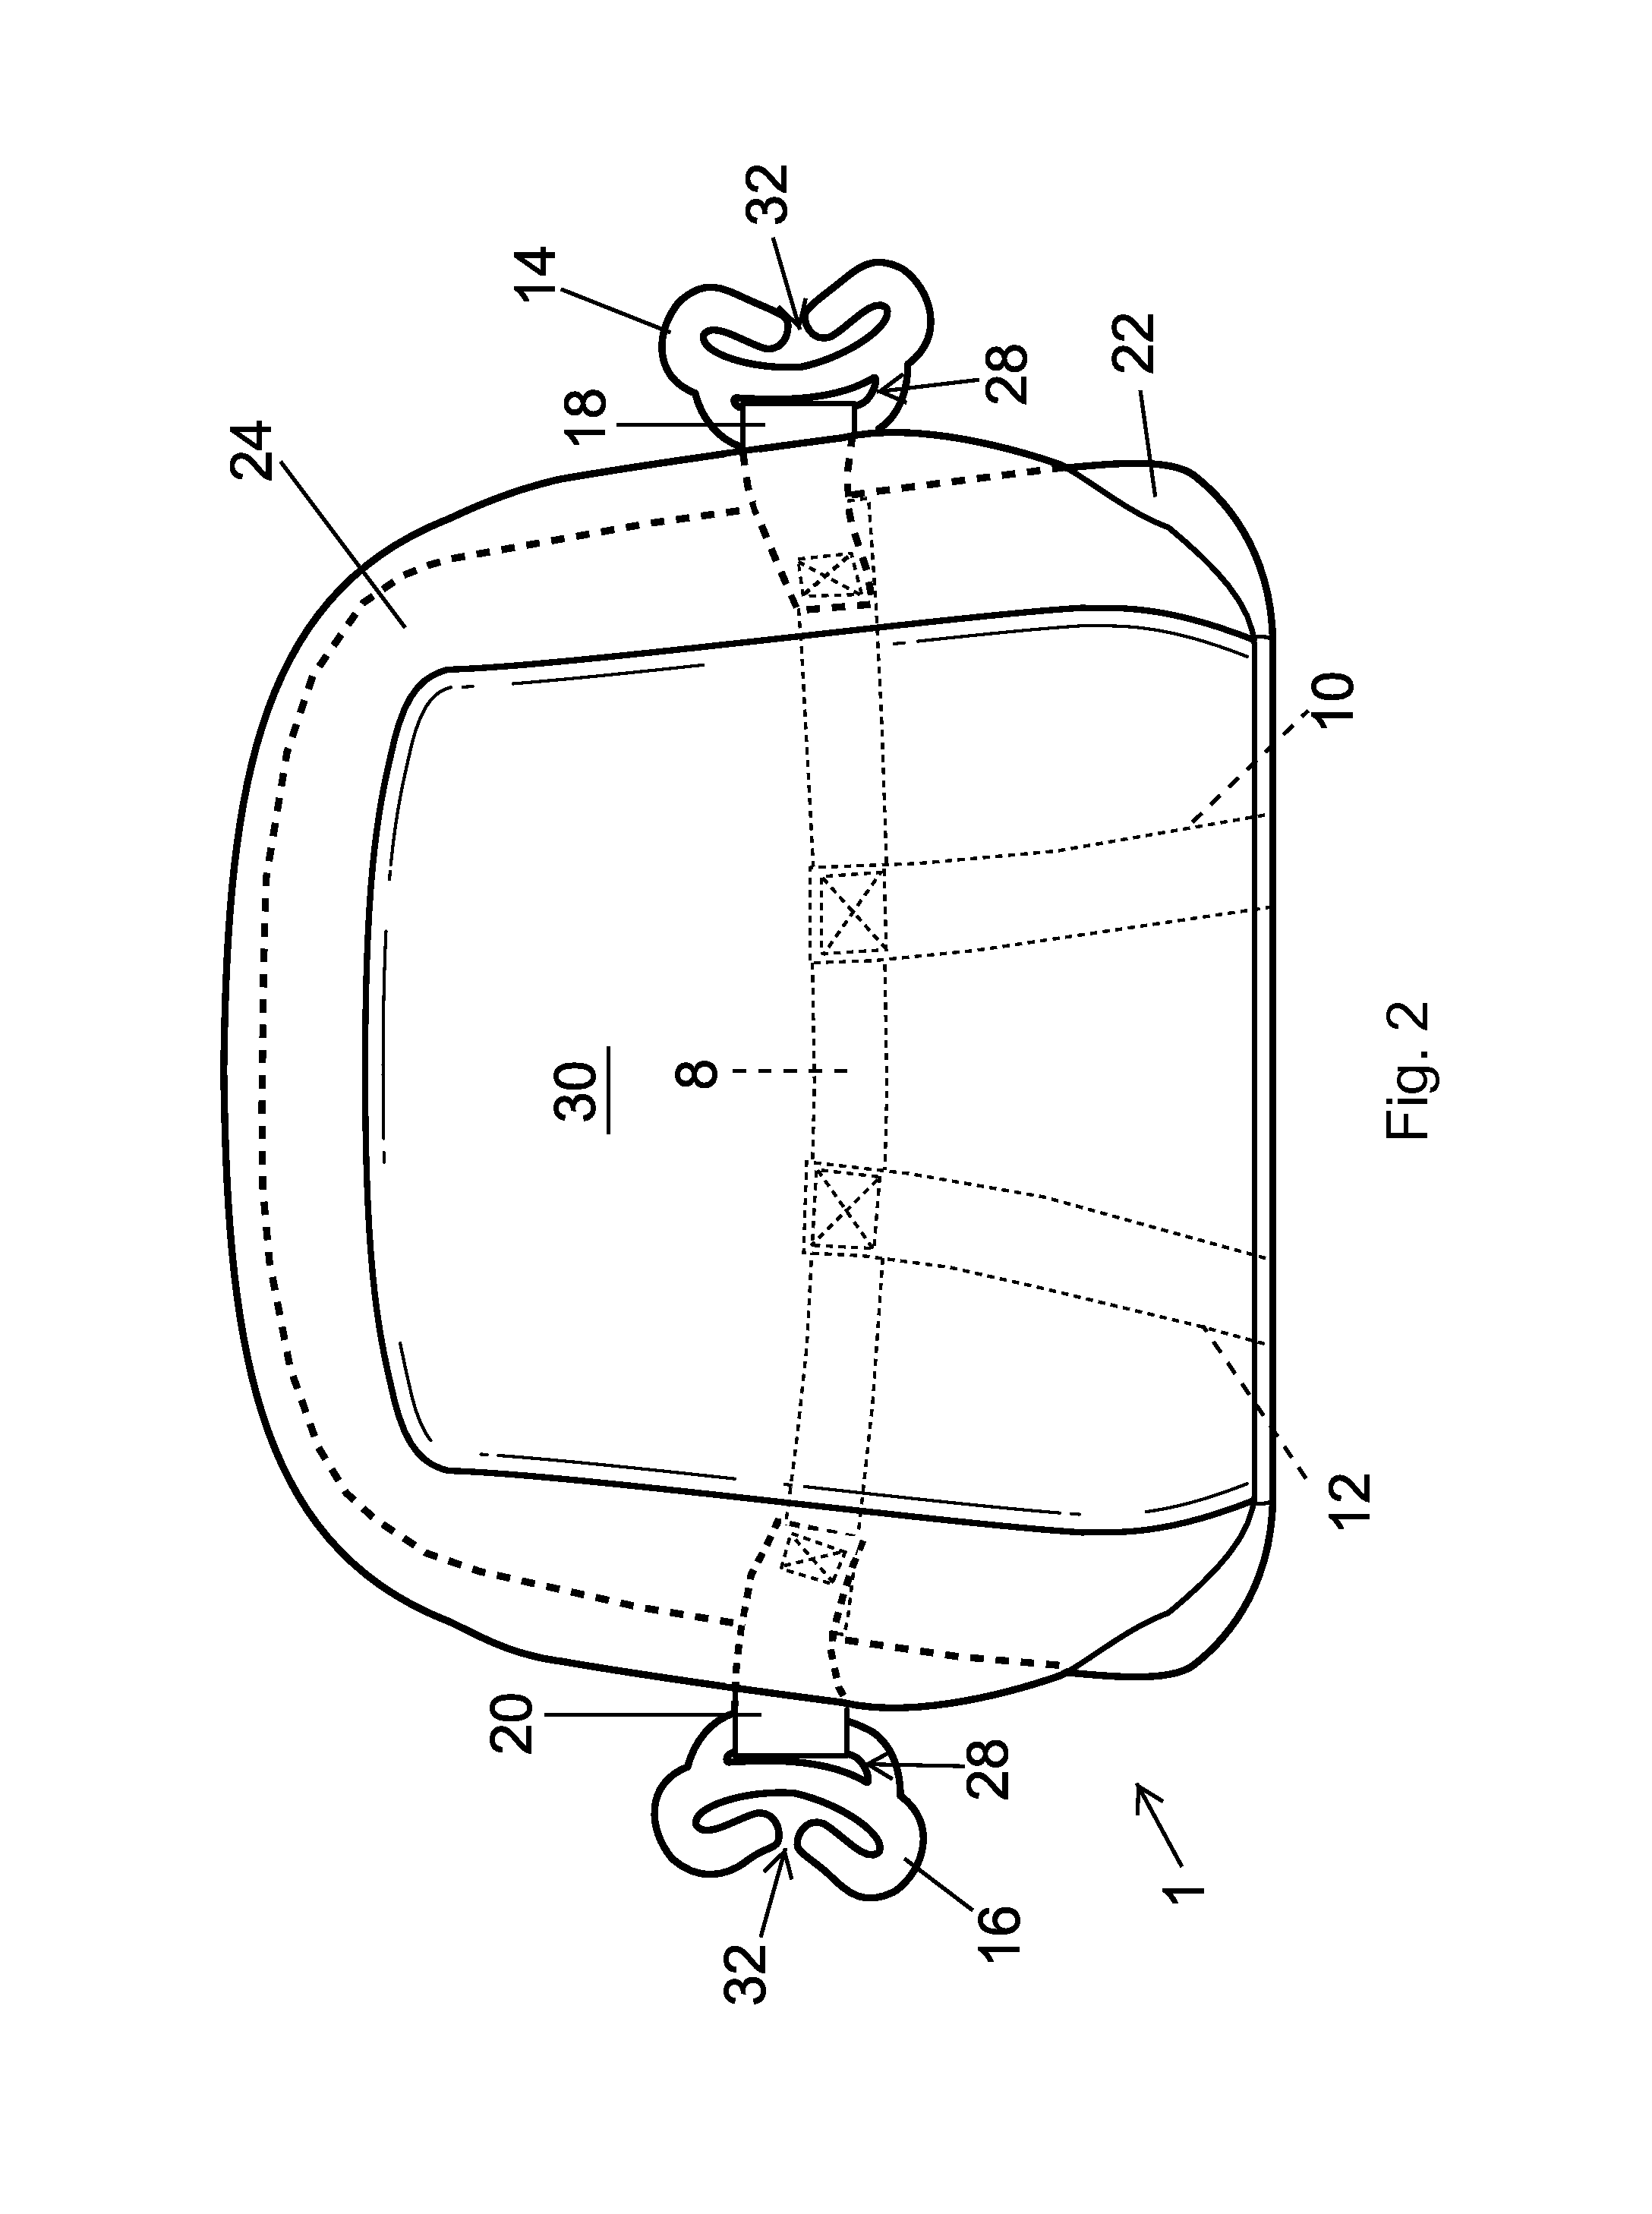 Booster cushion for use with a vehicle seat